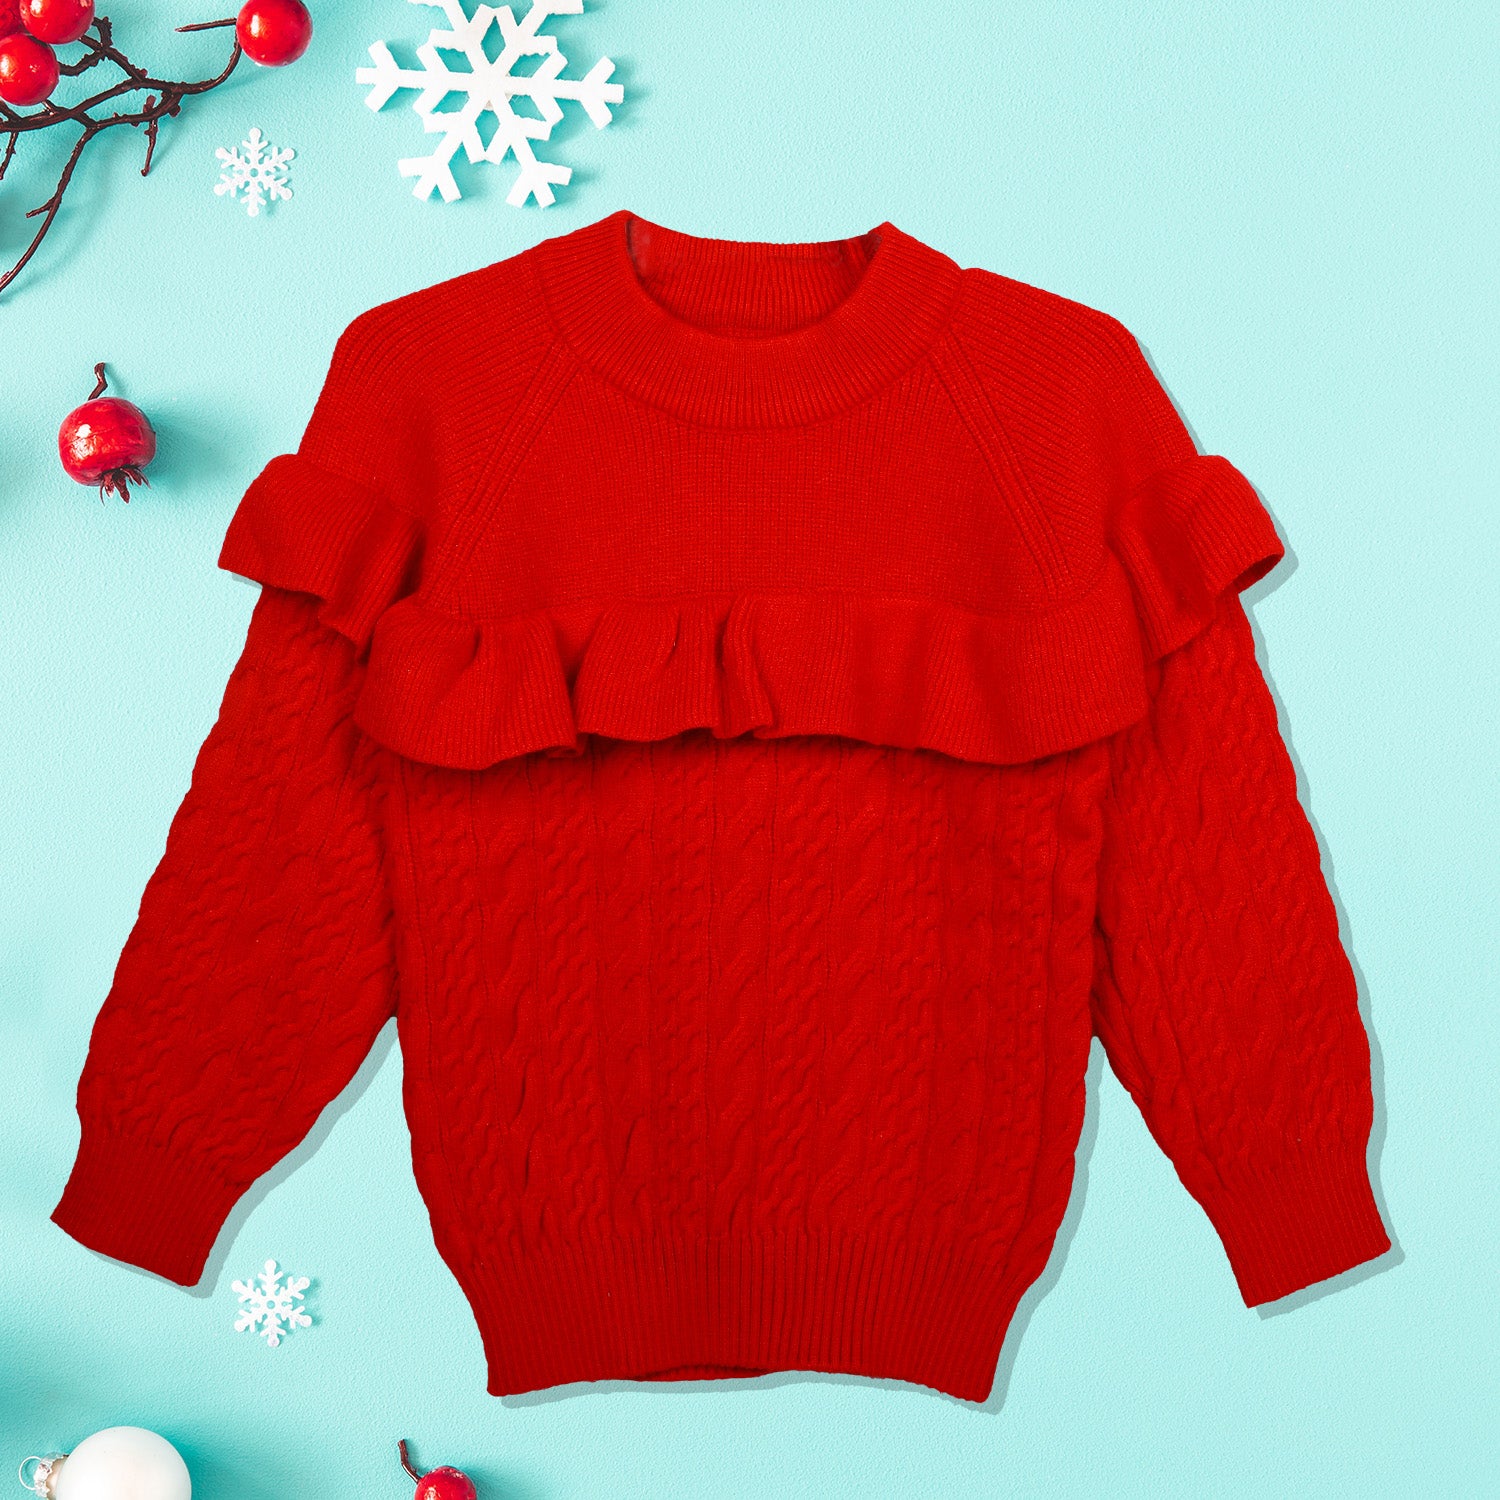 Ruffled Jumper Solid Premium Full Sleeves Braided Knit Sweater - Red - Baby Moo